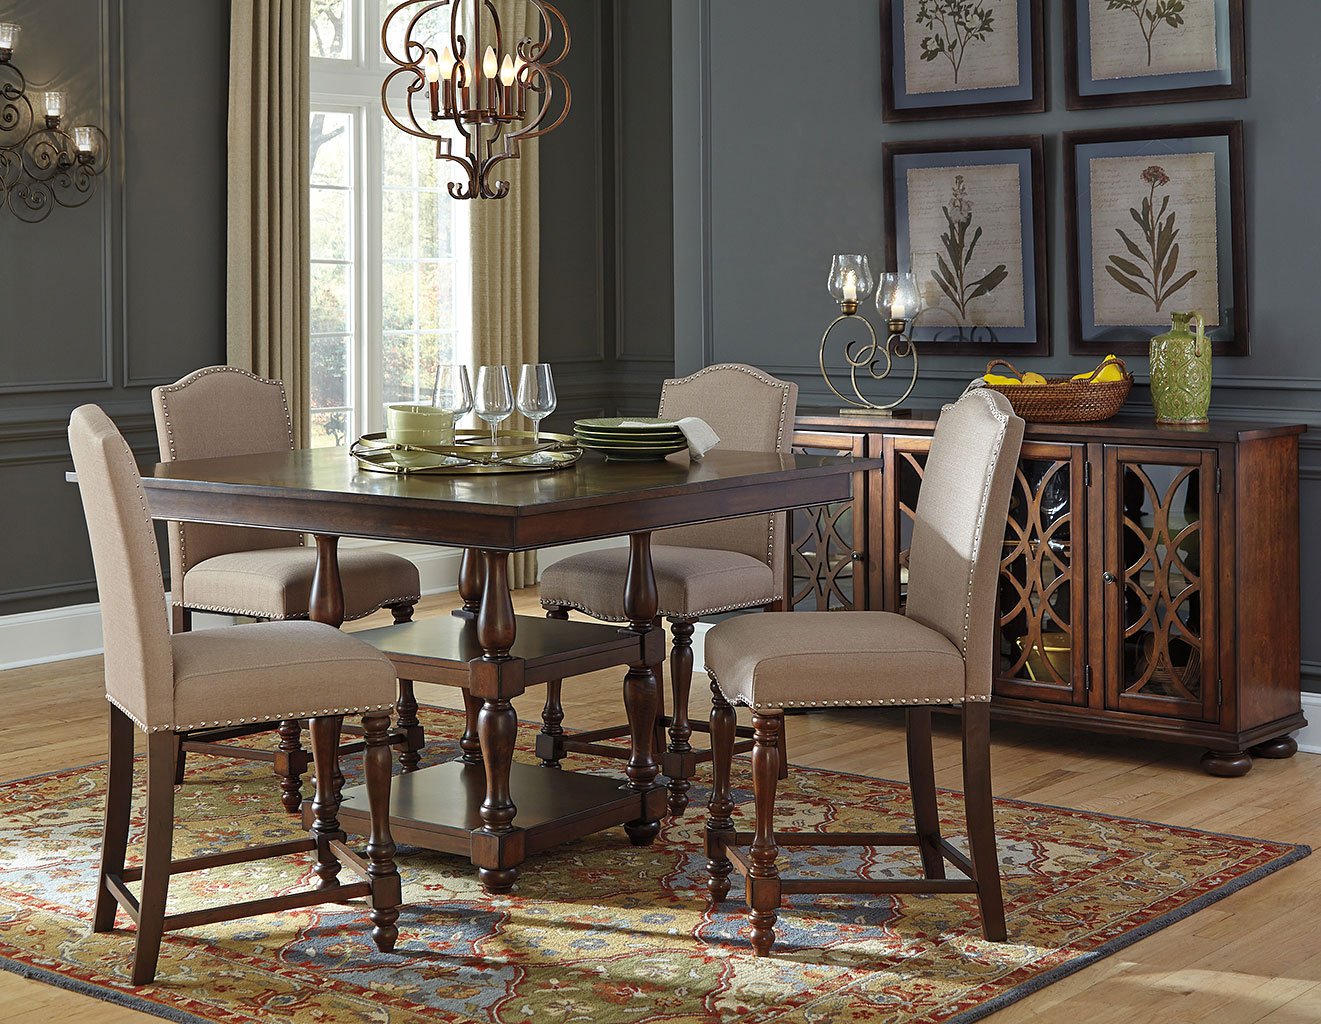 Baxenburg Counter Height Dining Room Set by Signature ...
